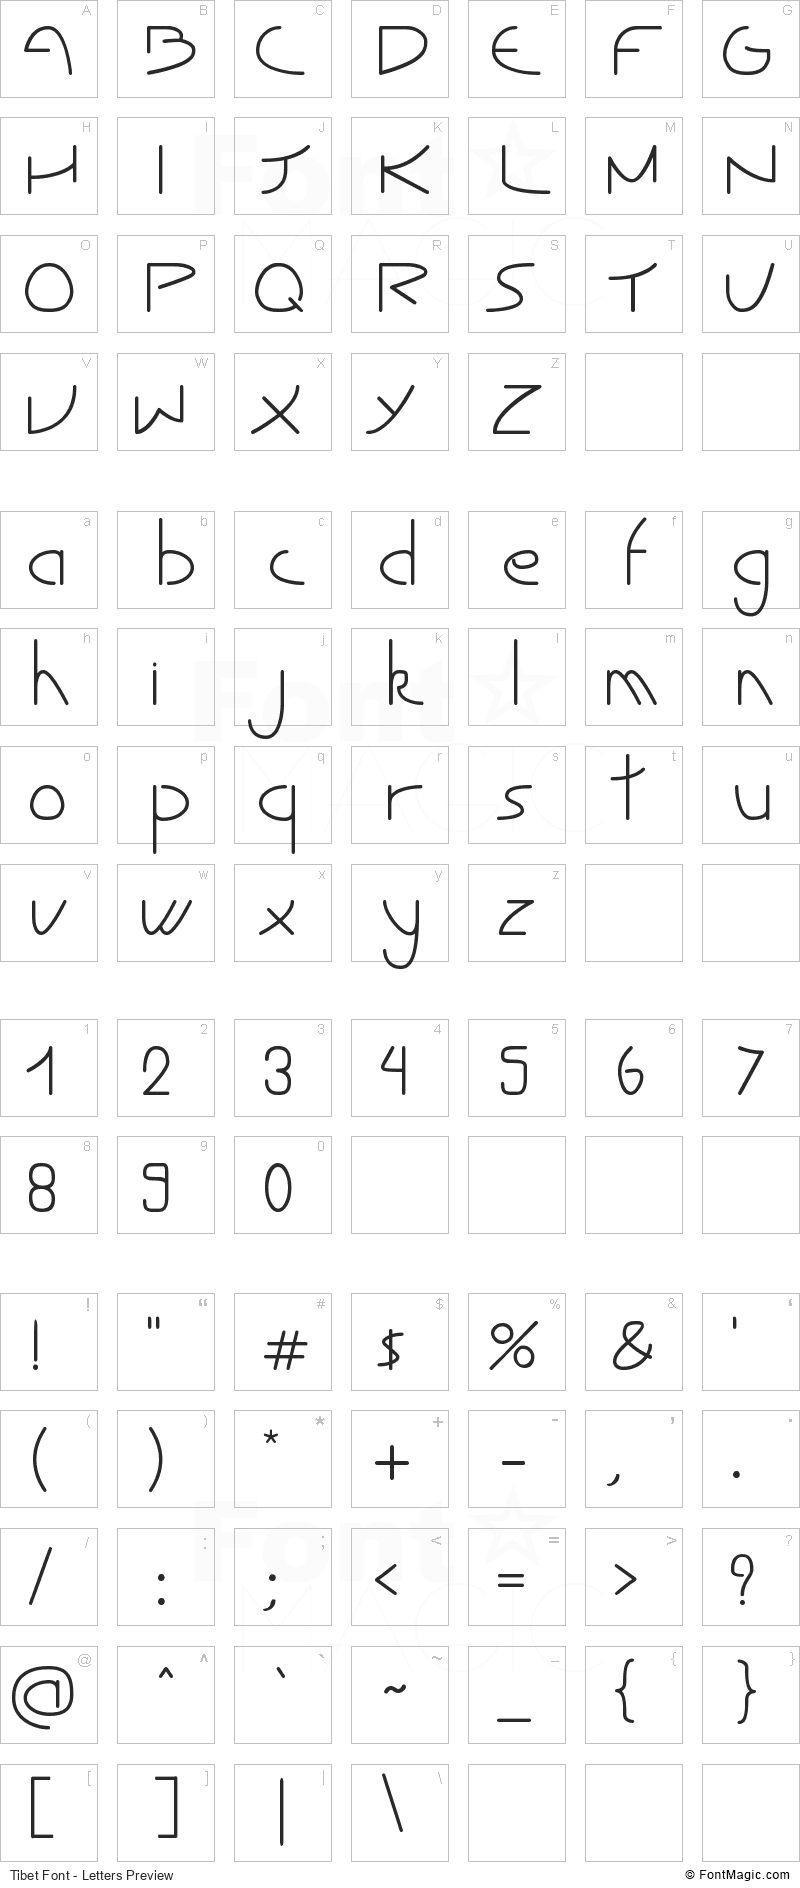 Tibet Font - All Latters Preview Chart